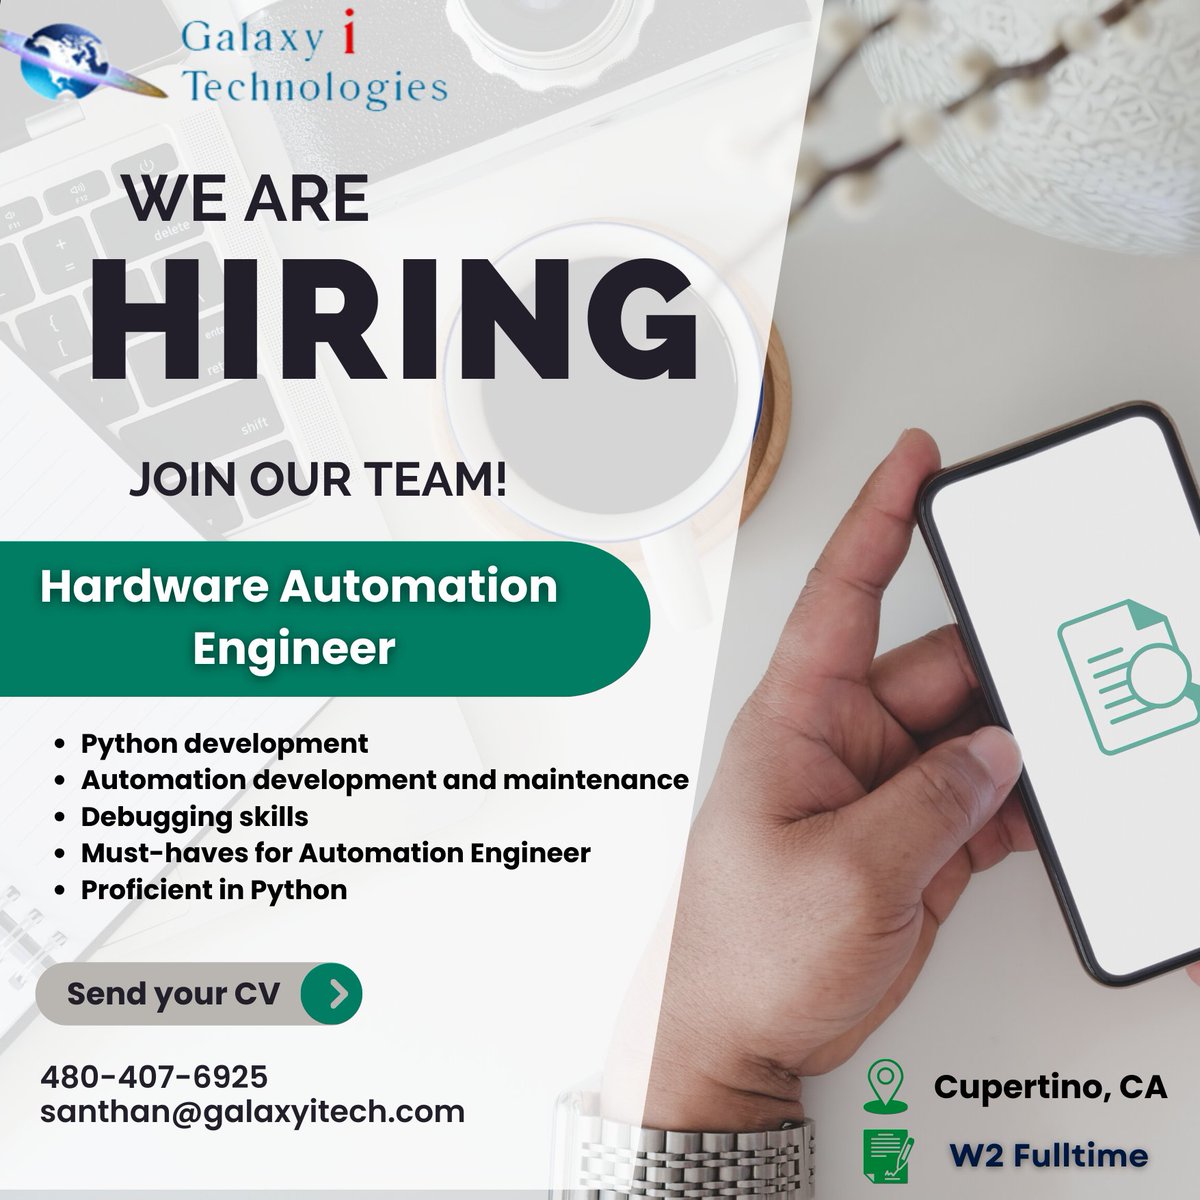 Galaxy I Technologies is looking for  Hardware Automation Engineer ,Cupertino, CA
W2/FULLTIME

For more details: santhan@galaxyitech.com/ 480-407-6925

Apply Now: lnkd.in/gmqBQ7cS.

engineering #python #technology #softwaretesters #sdet #success #corejava #apitesting #sele